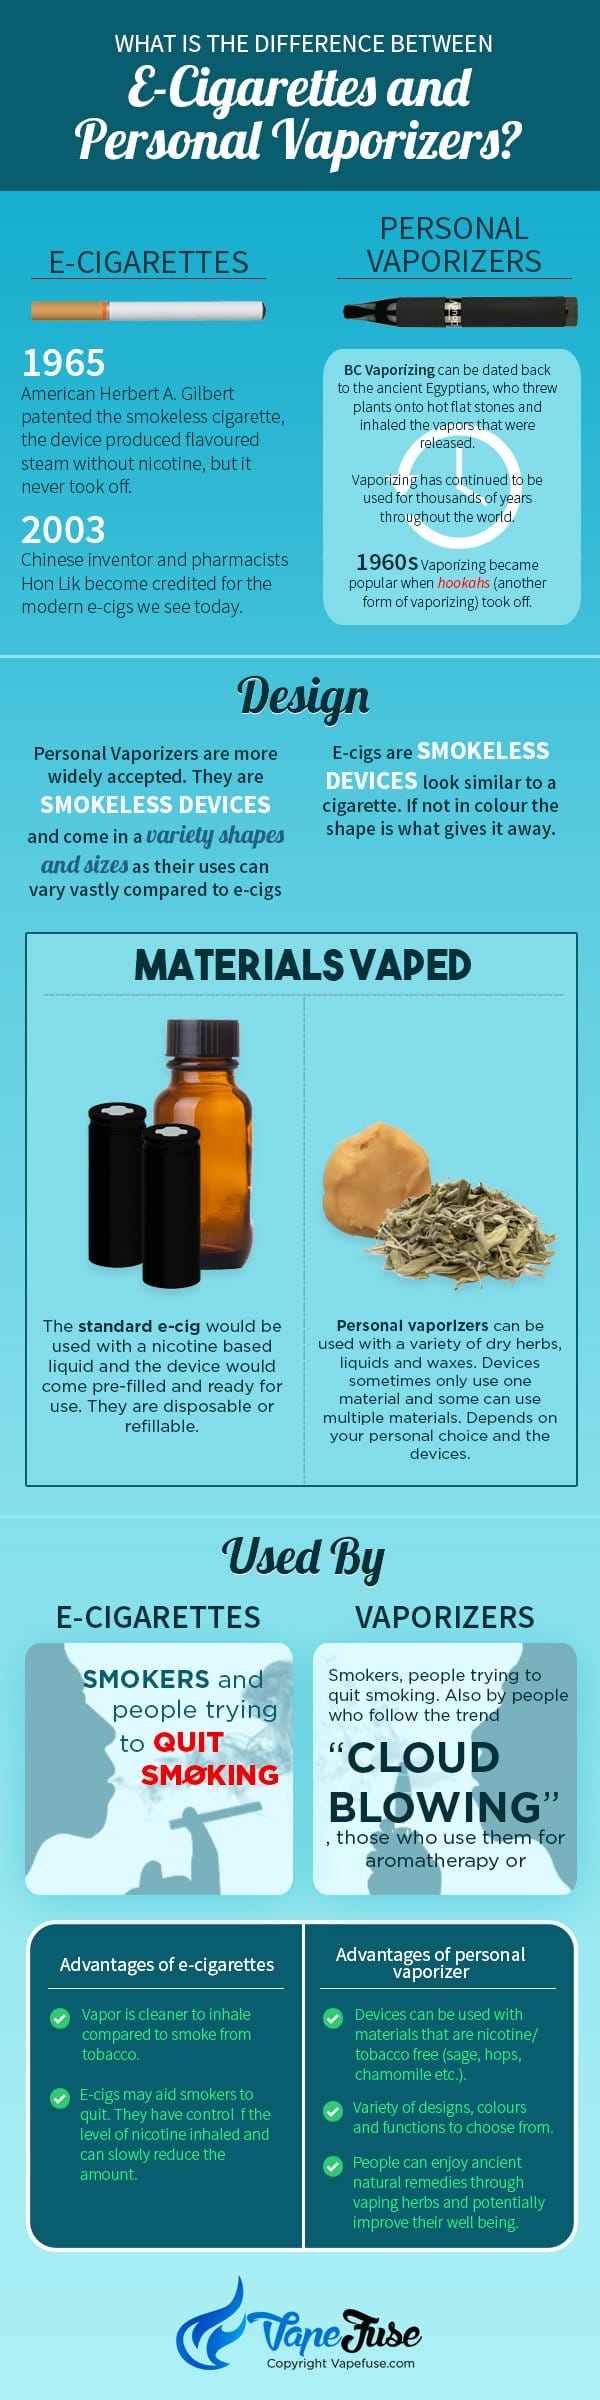 The Difference Between E-Cigs and Personal Vapes